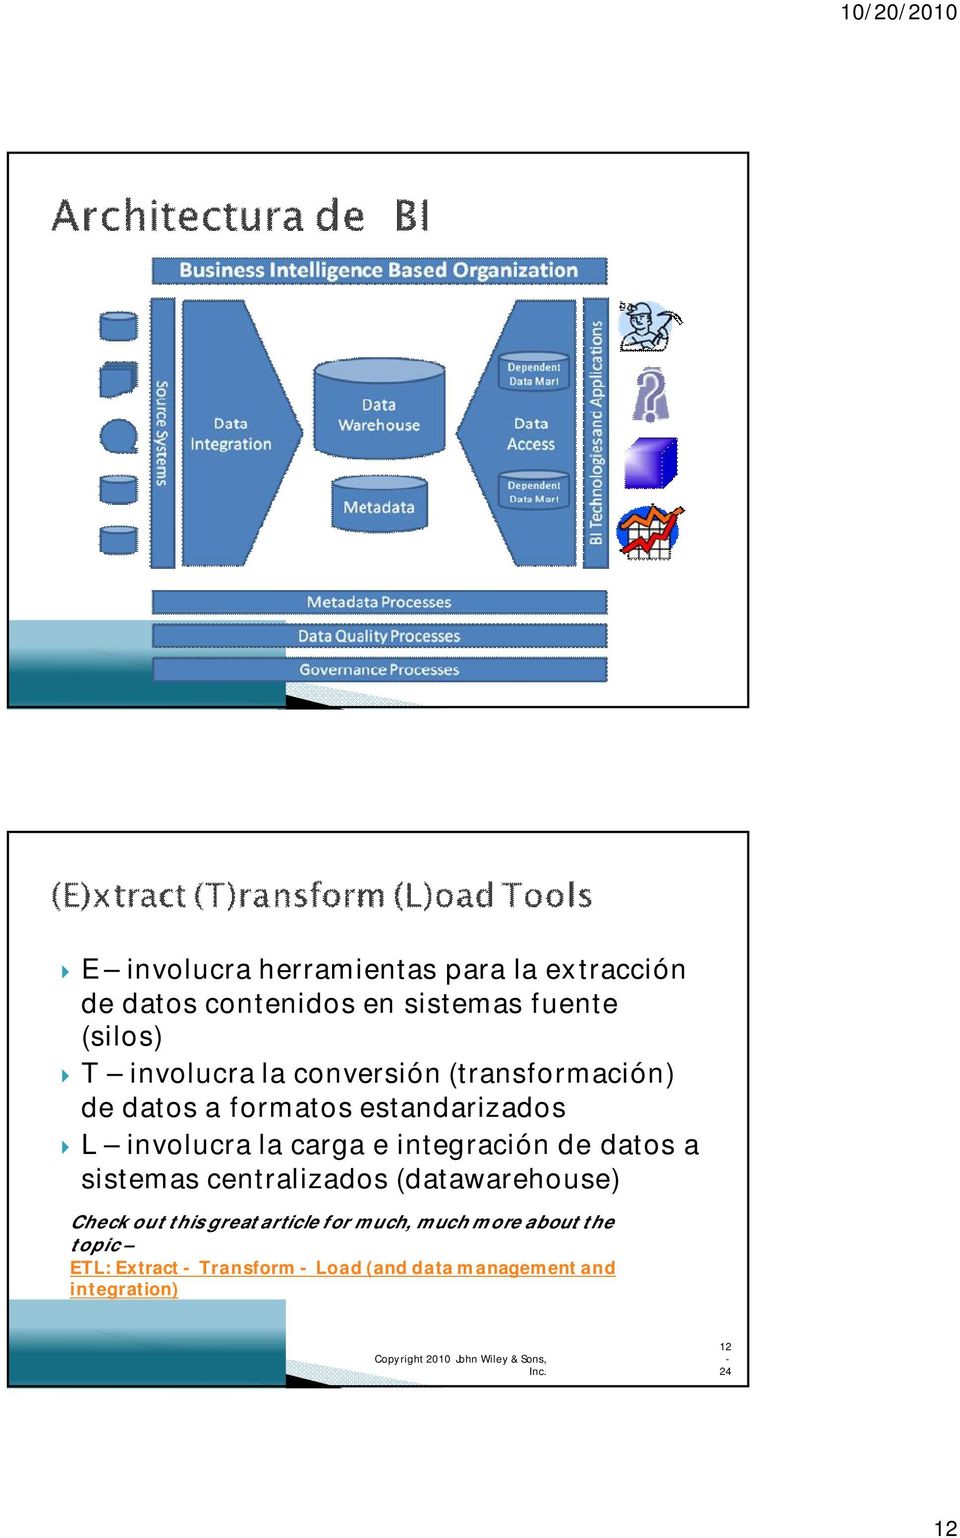 sistemas centralizados (datawarehouse) Check out this great article for much, much more about the topic ETL: